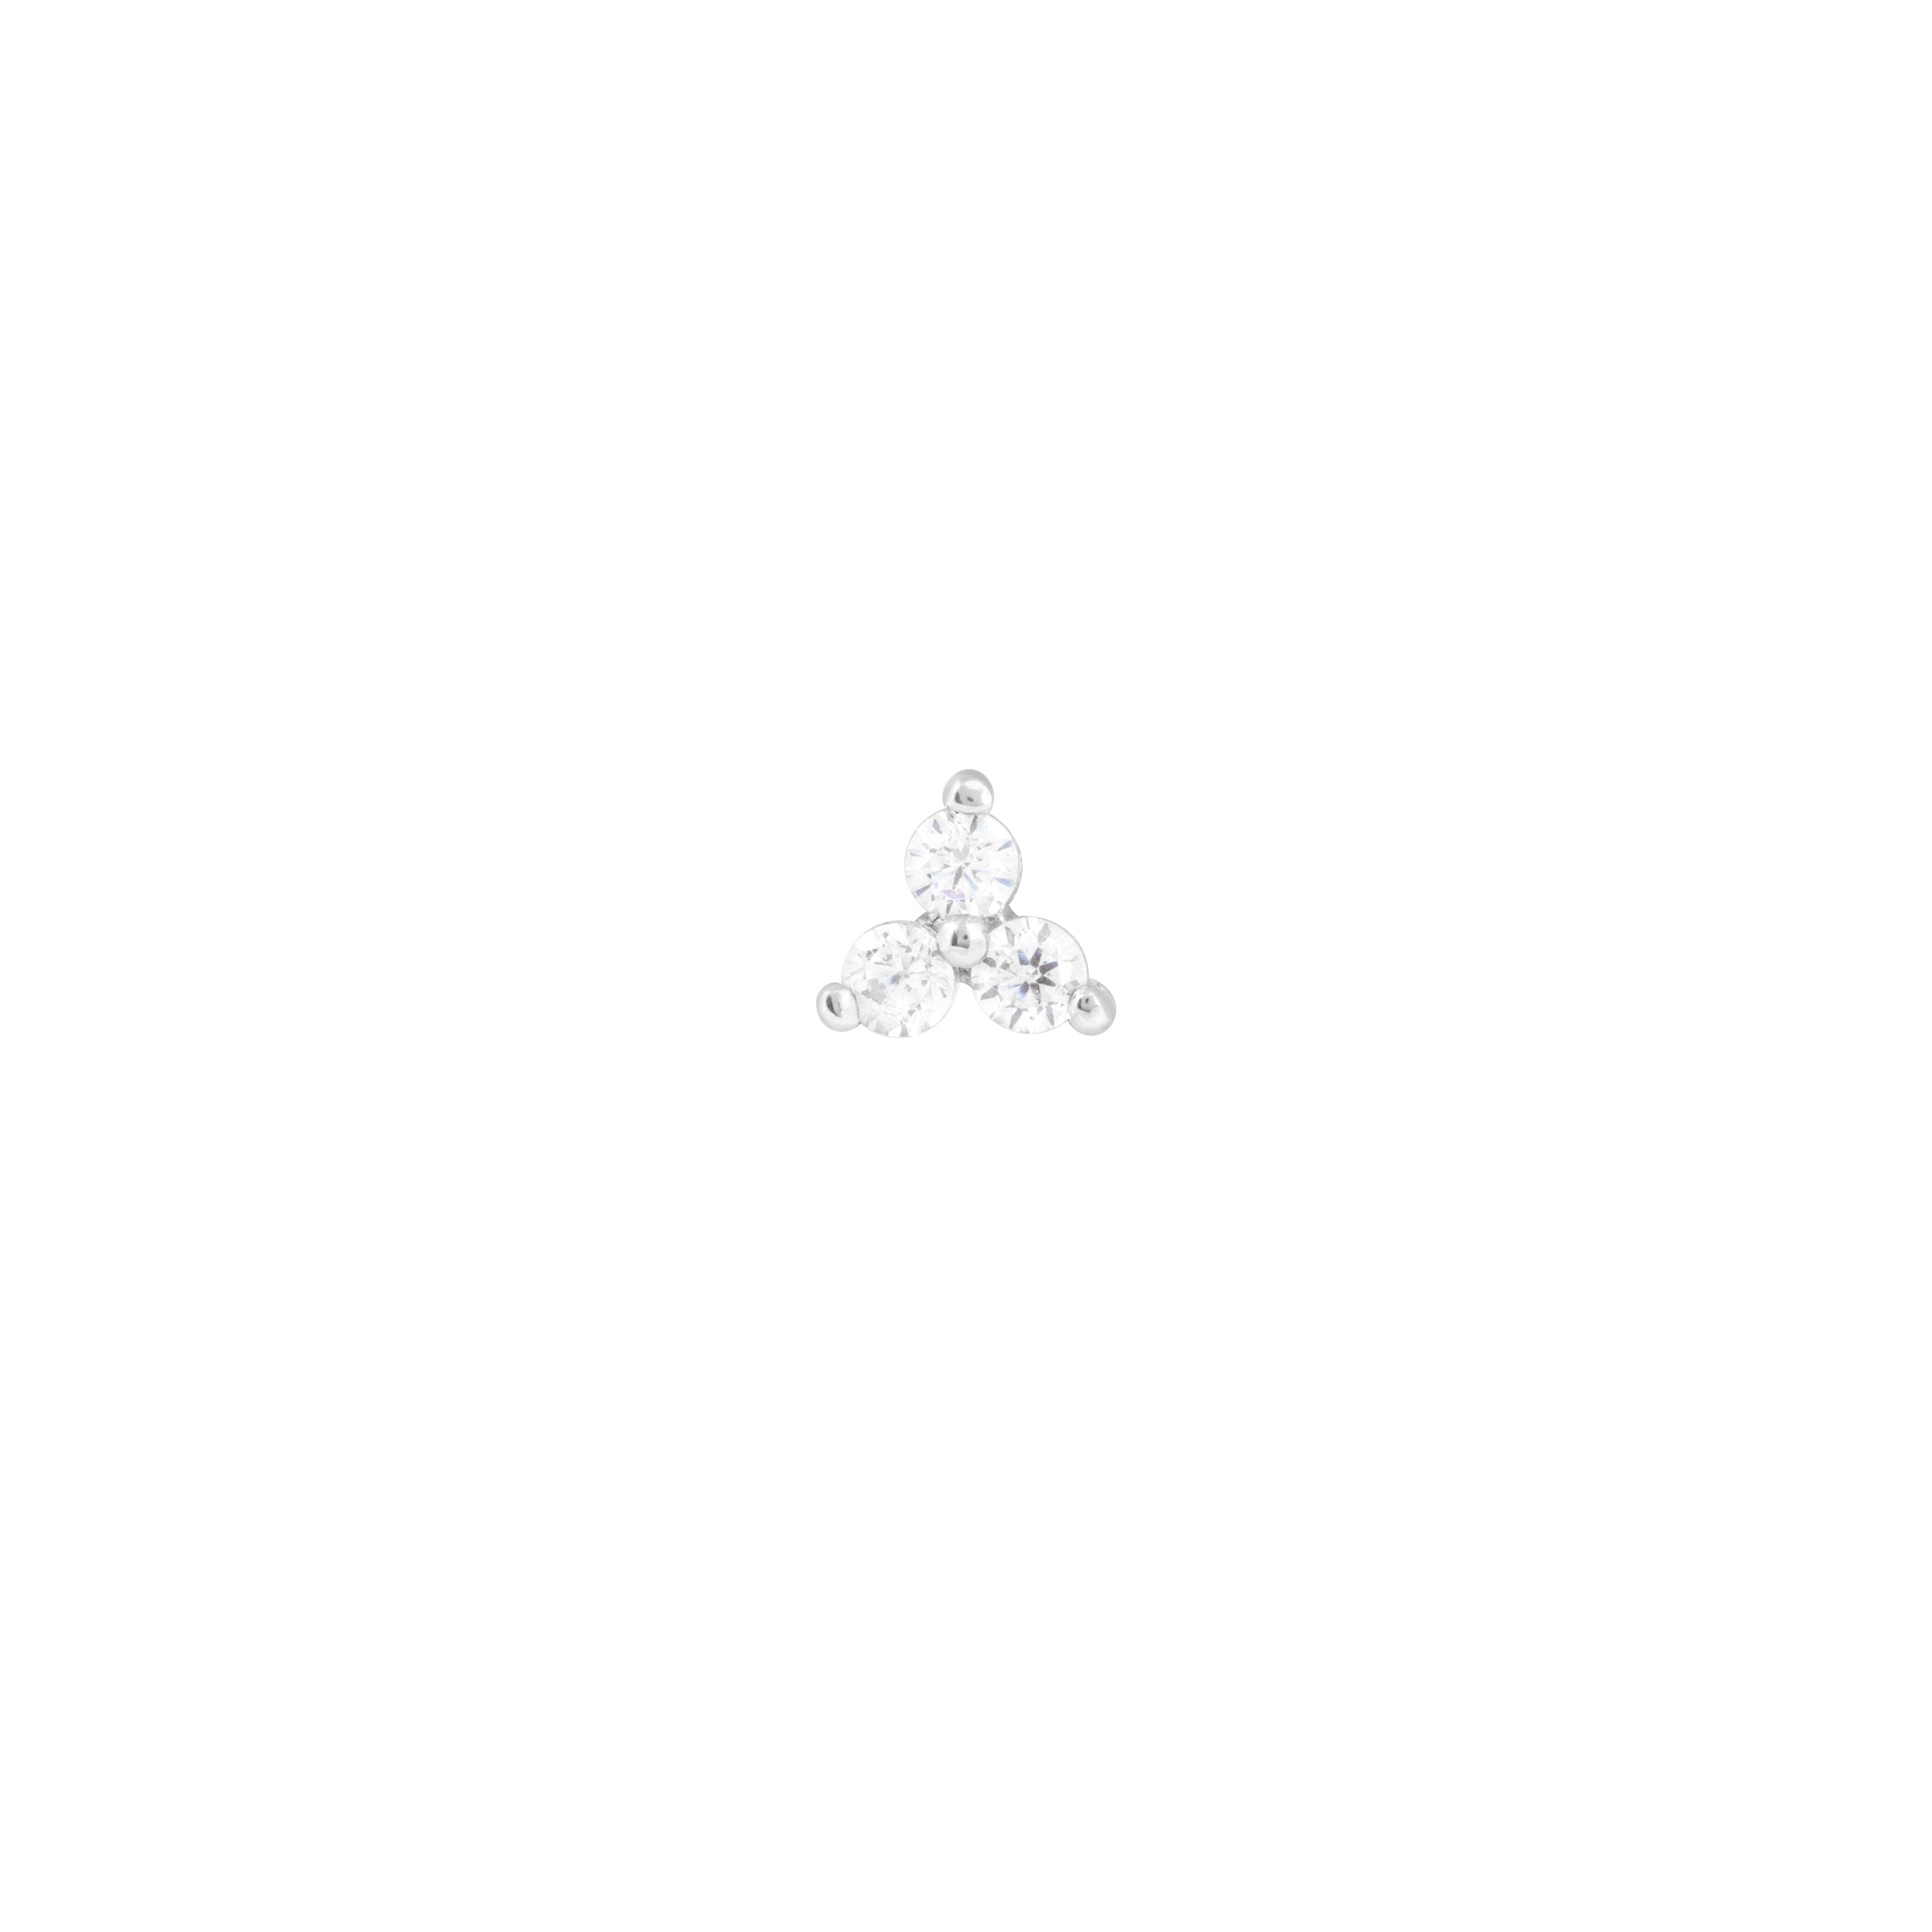 Solid White Gold Triple Crystal Piercing Stud